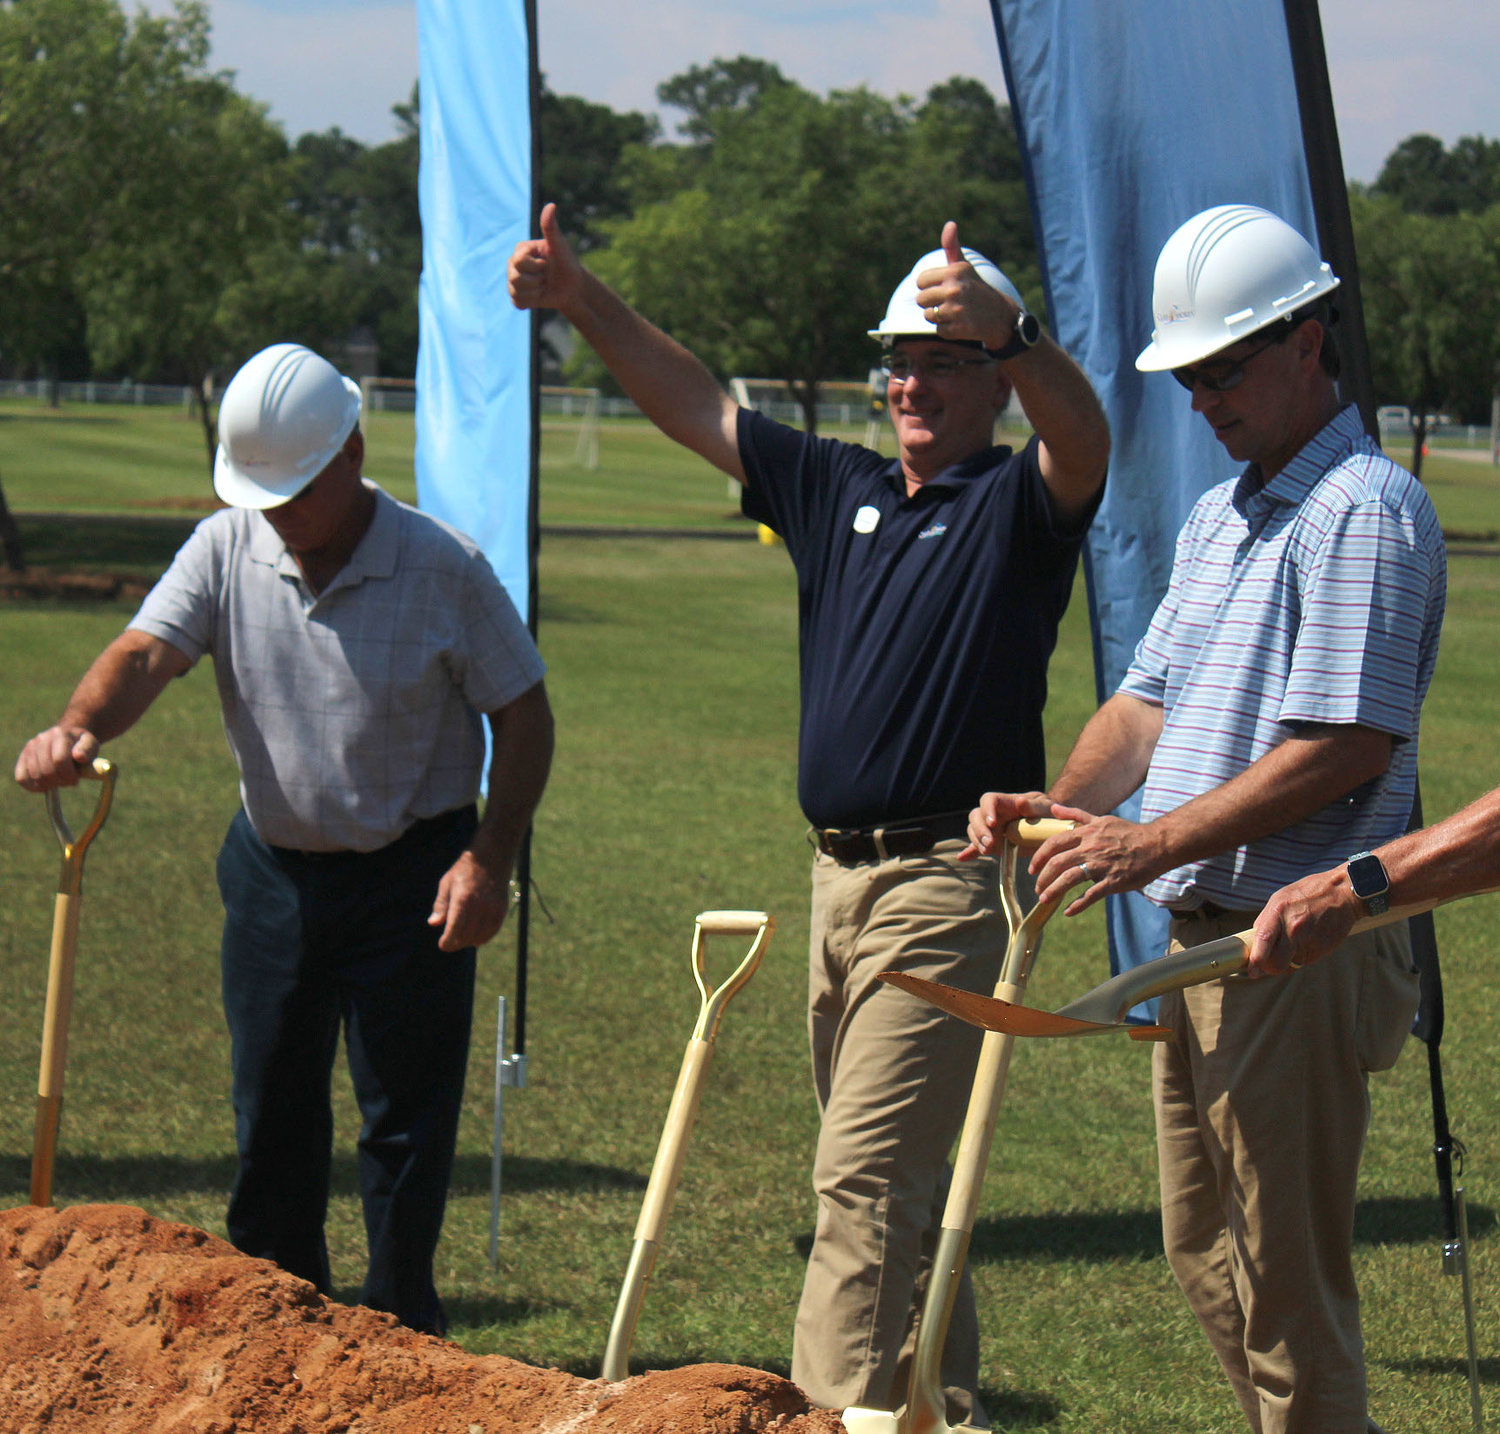 Grant Brown, public information officer and recreation and cultural affairs director for the City of Gulf Shores, gives a double thumbs-up after the June 22 groundbreaking ceremony that preceded construction of 12 pickleball courts at the Gulf Shores Sportsplex.